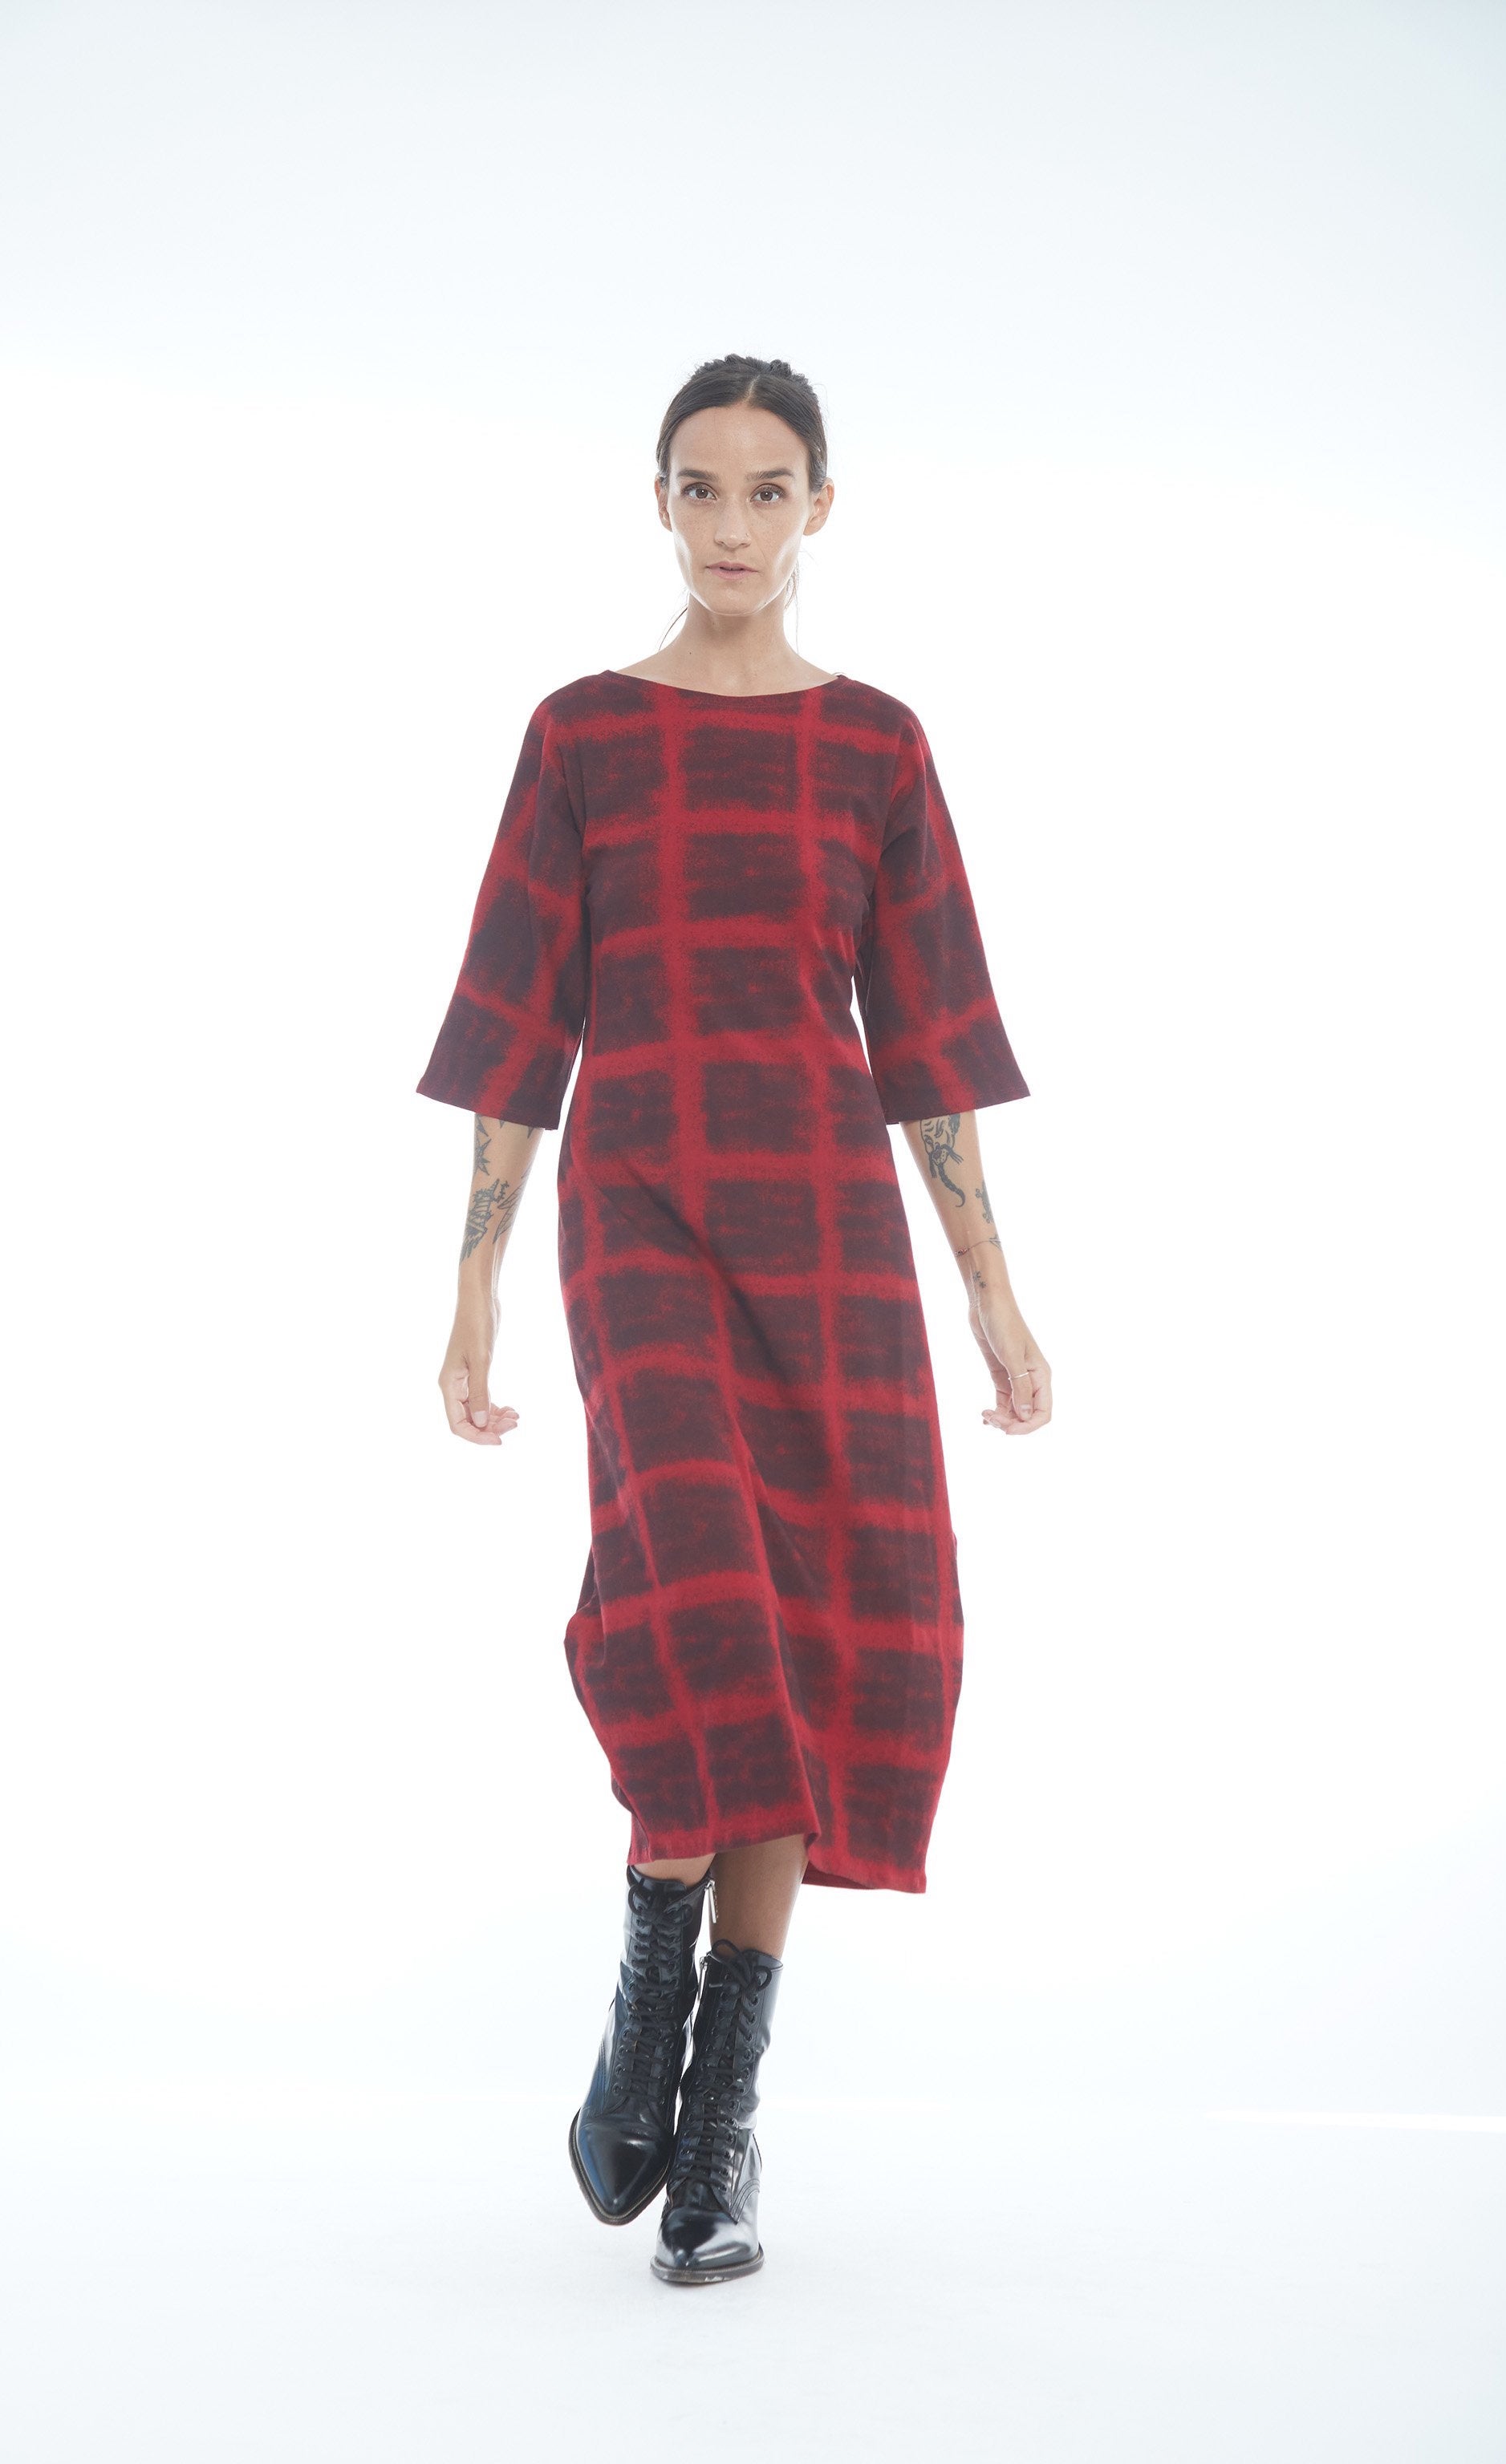 Front full body view of a woman wearing the mxmatthildur mavis dress in a red and black plaid print. This dress has 3/4 length sleeves, large pockets, and sits below the knees.